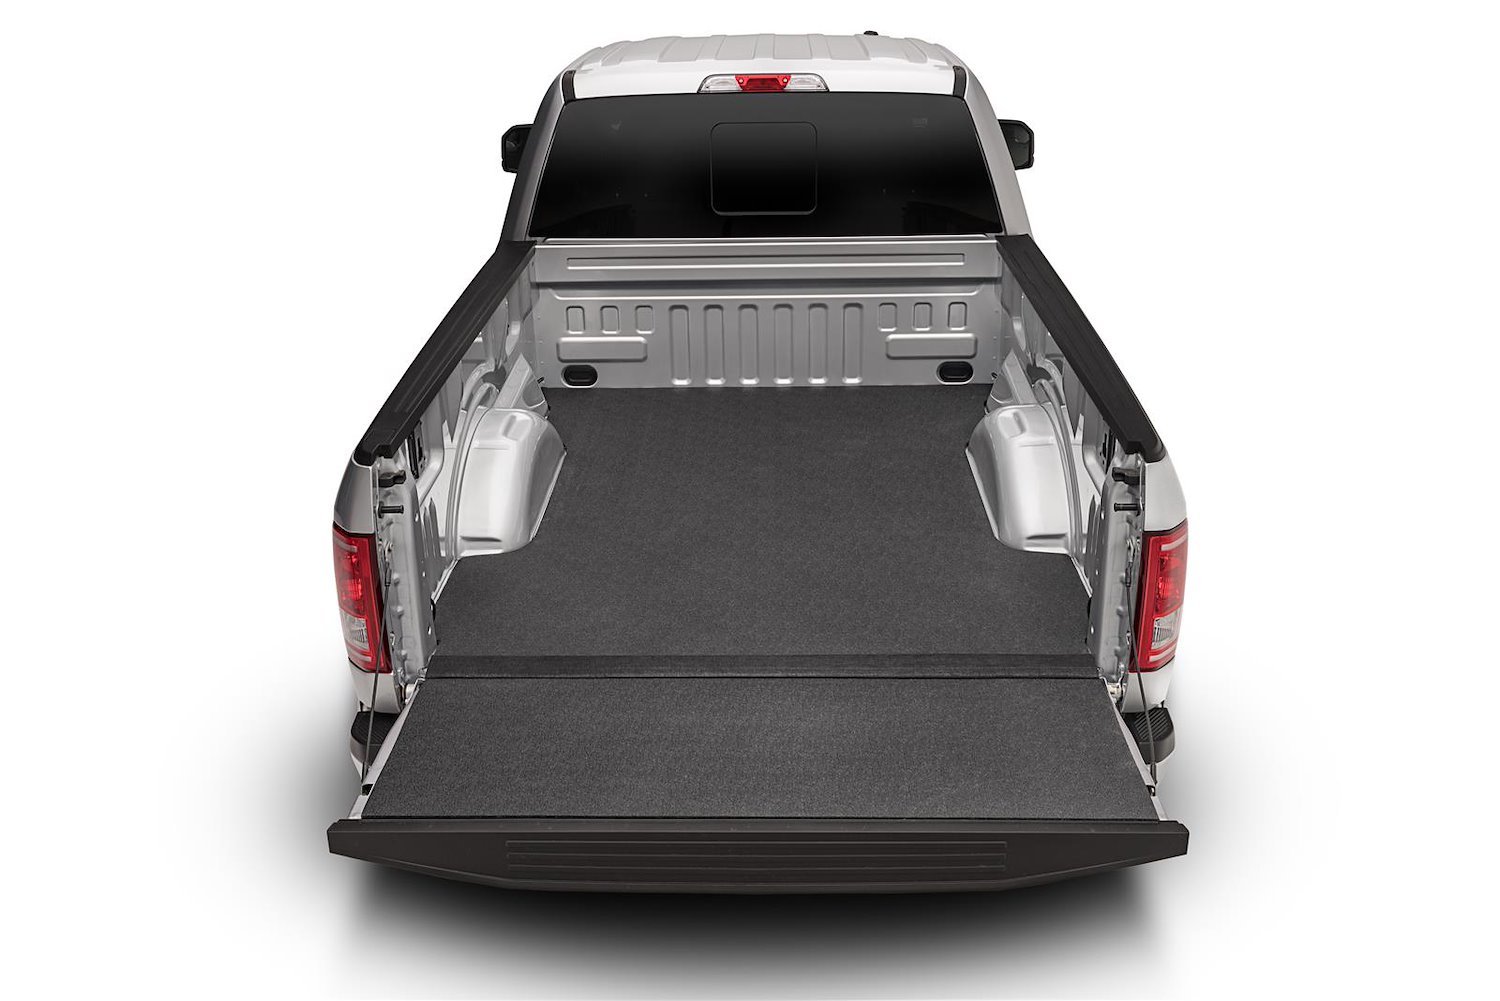 IMQ17LBS IMPACT MAT FOR SPRAY-IN OR NO BED LINER 17-23 FORD SUPERDUTY 8.0' LONG BED